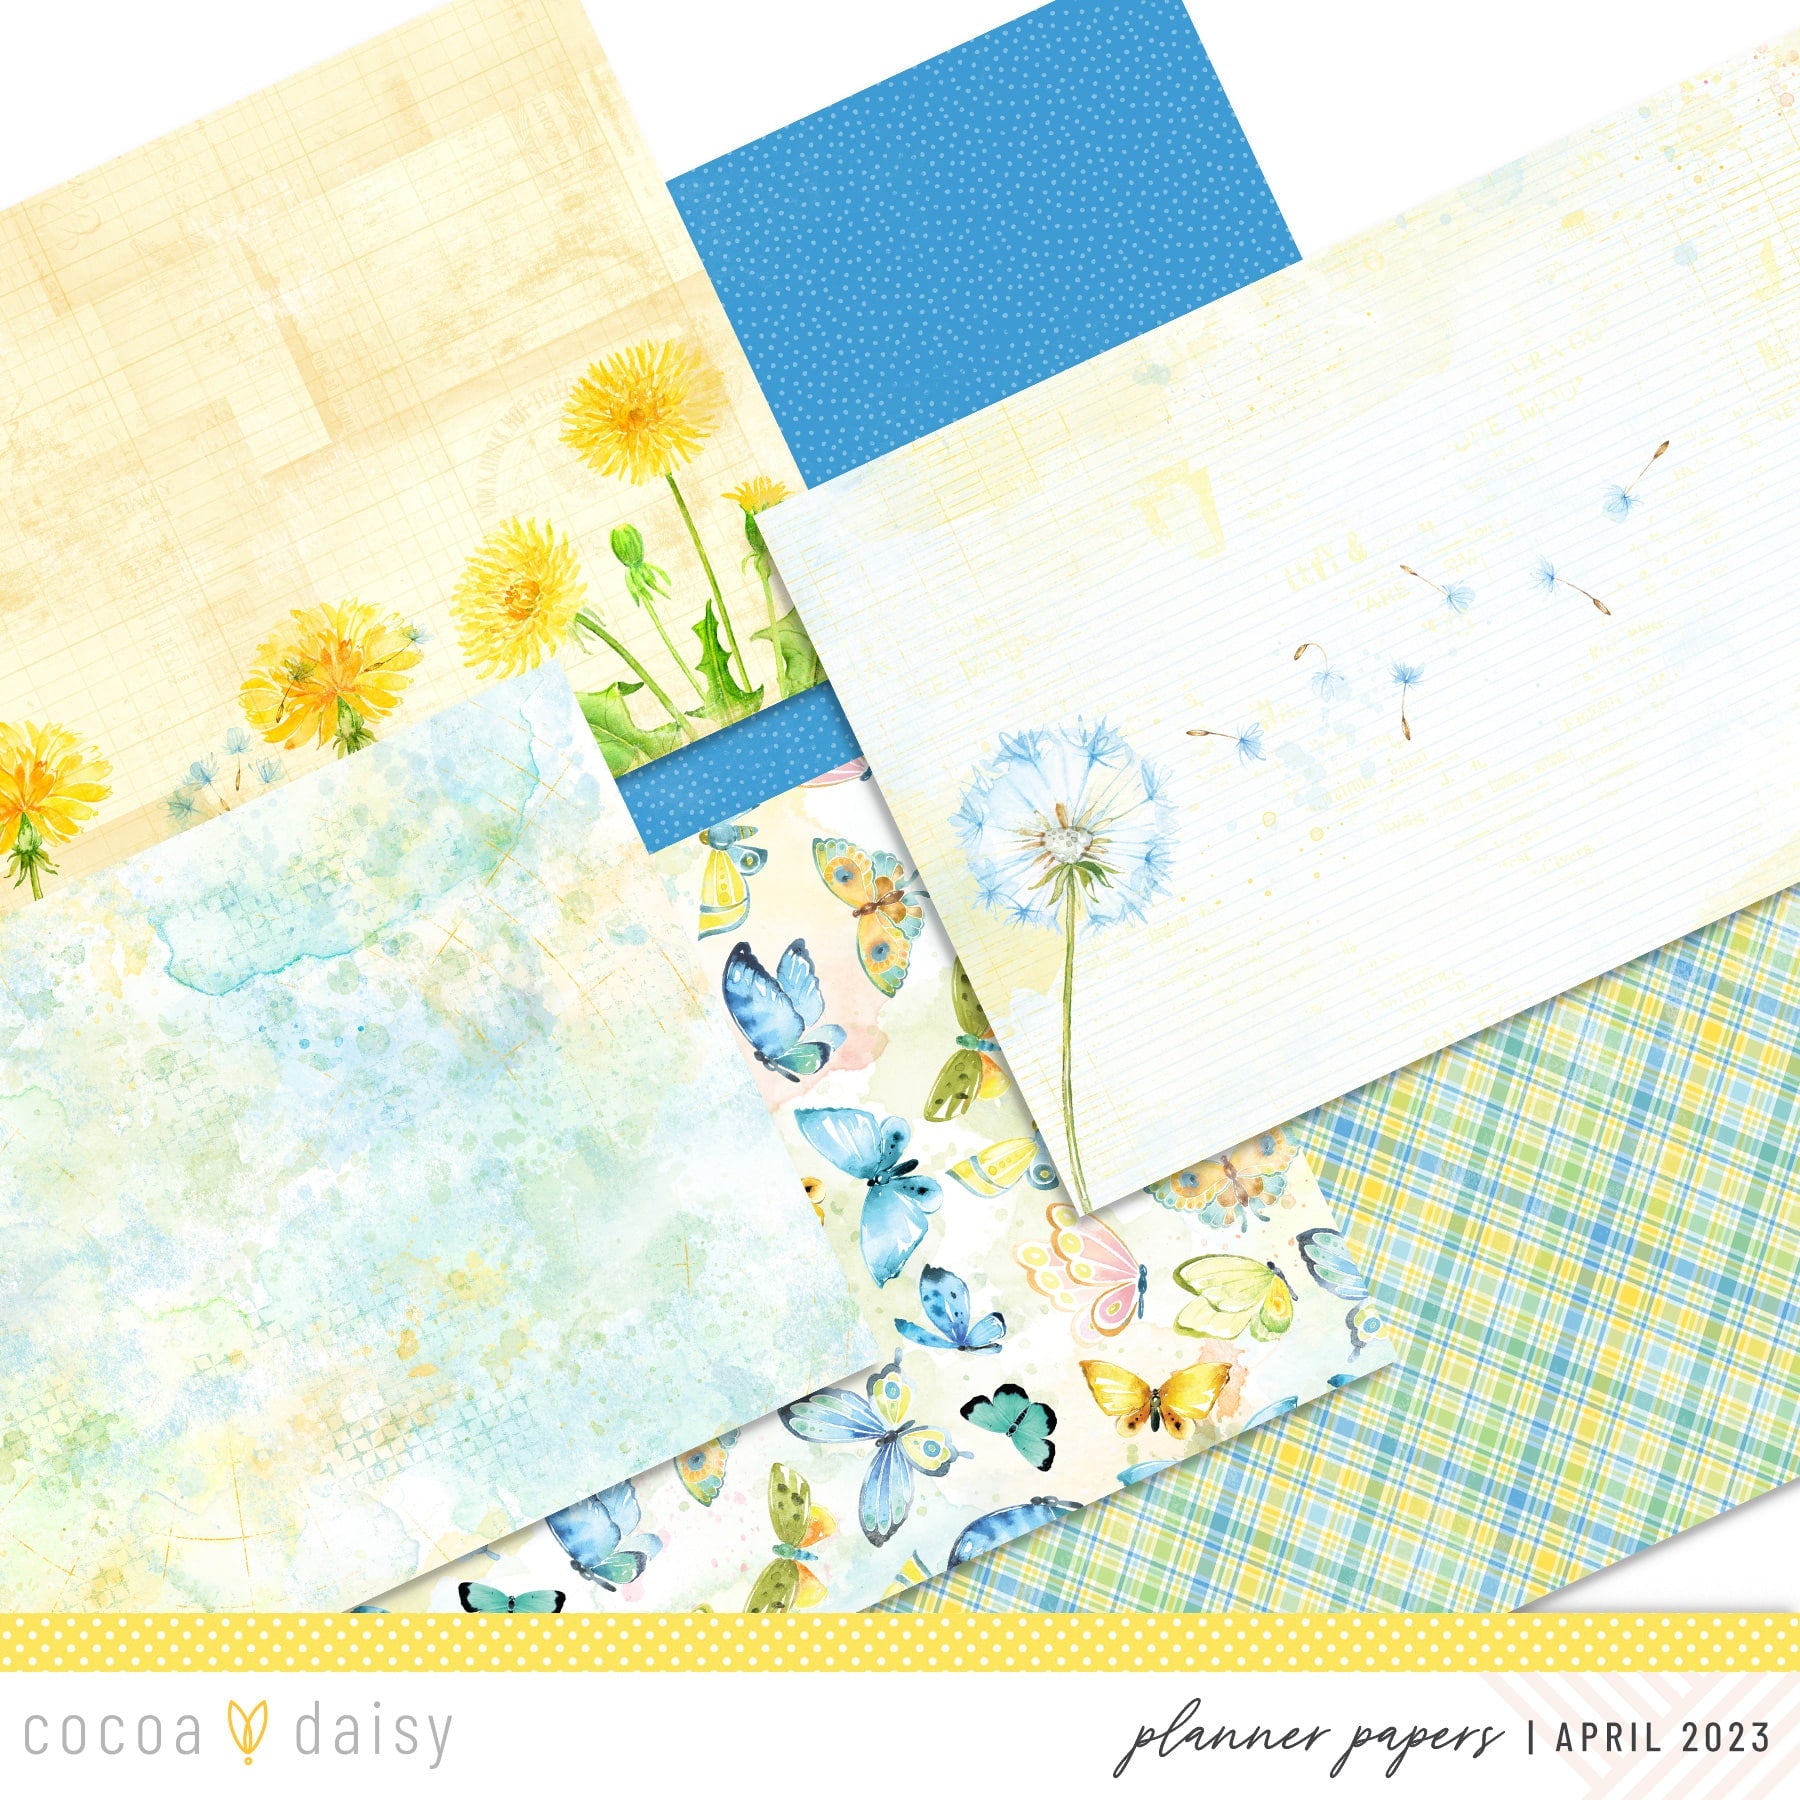 Dandelion-Wishes-Apr23-Planner-Extra-Papers.jpg